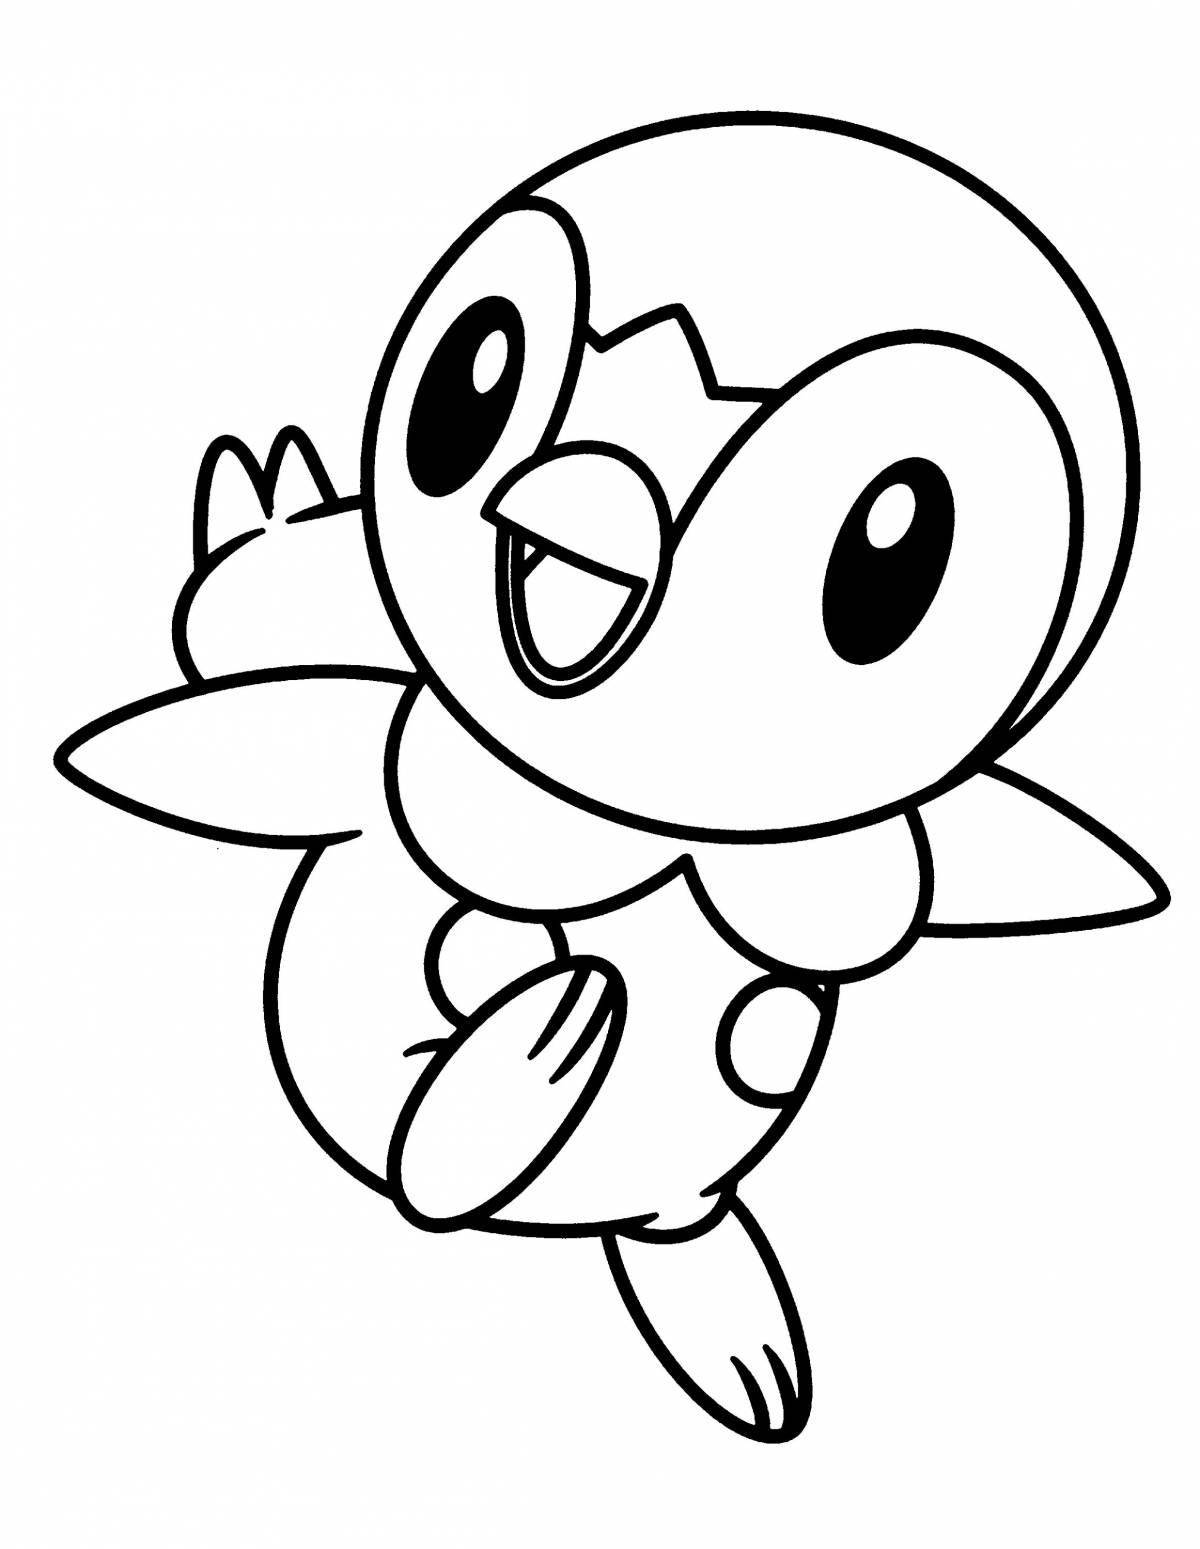 Grand Piplup pokemon coloring page